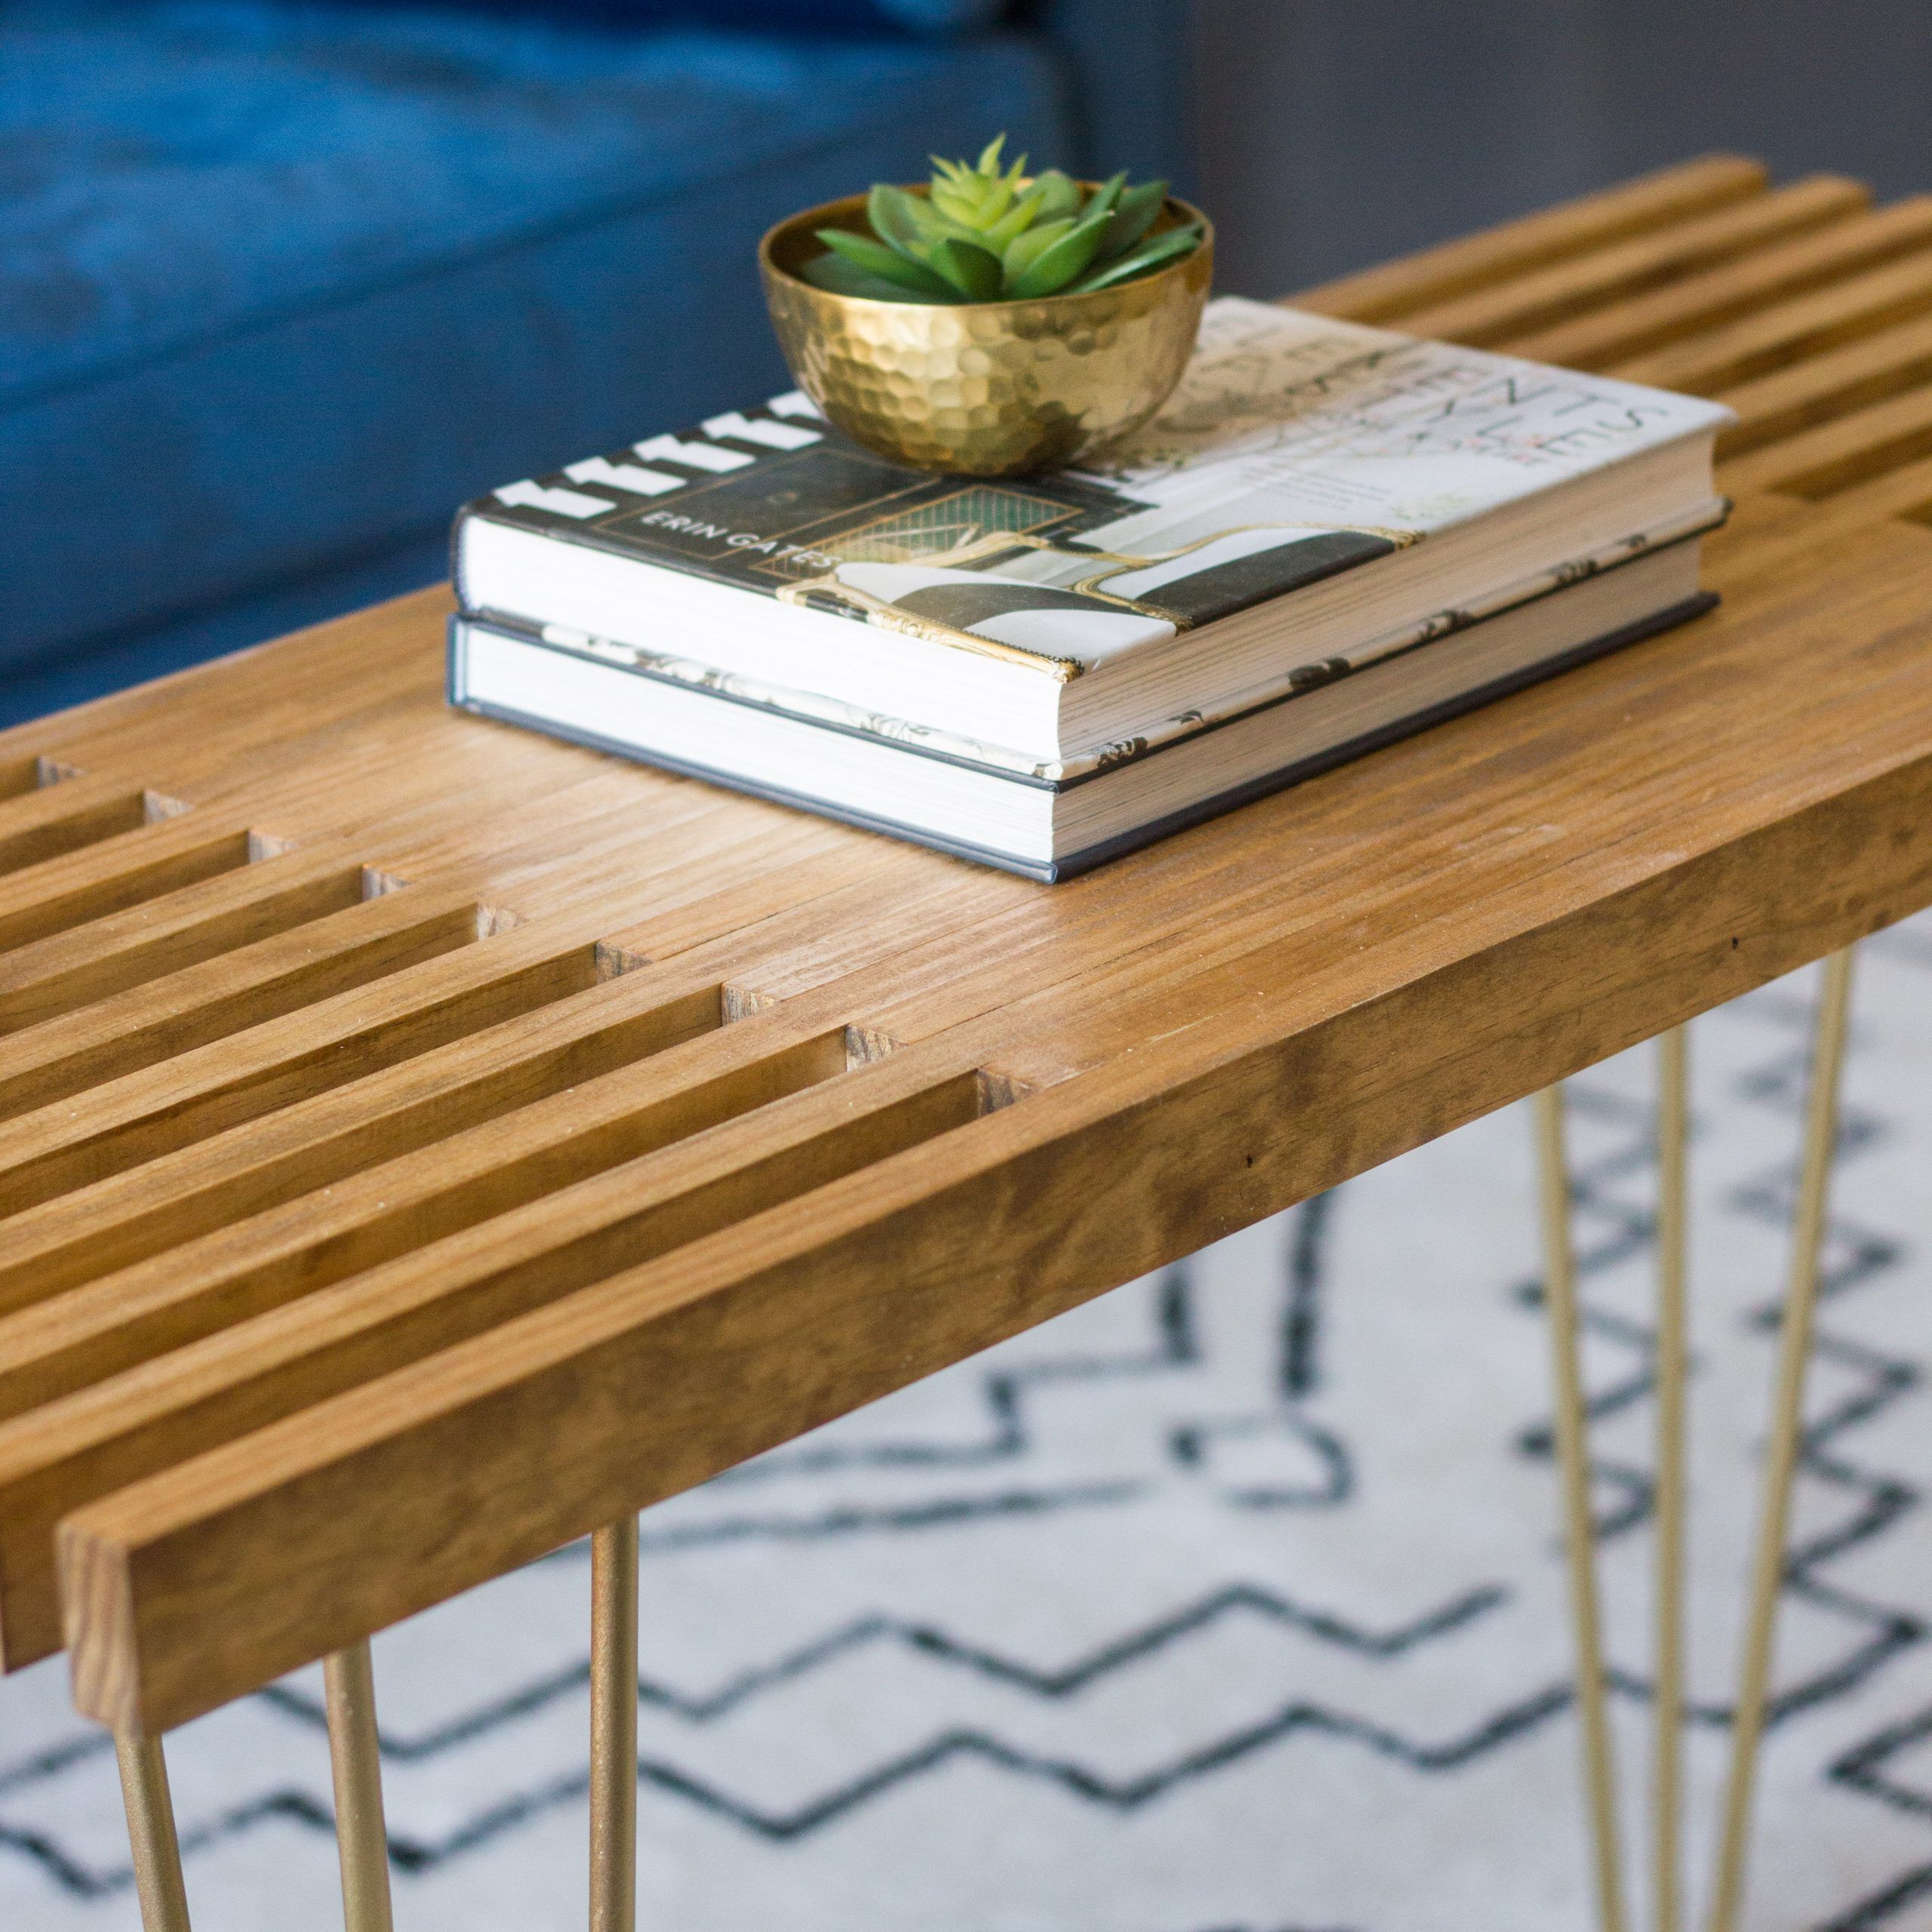 Diy Slatted Coffee Table With Hairpin Legs – Erin Spain For Slat Coffee Tables (View 2 of 15)